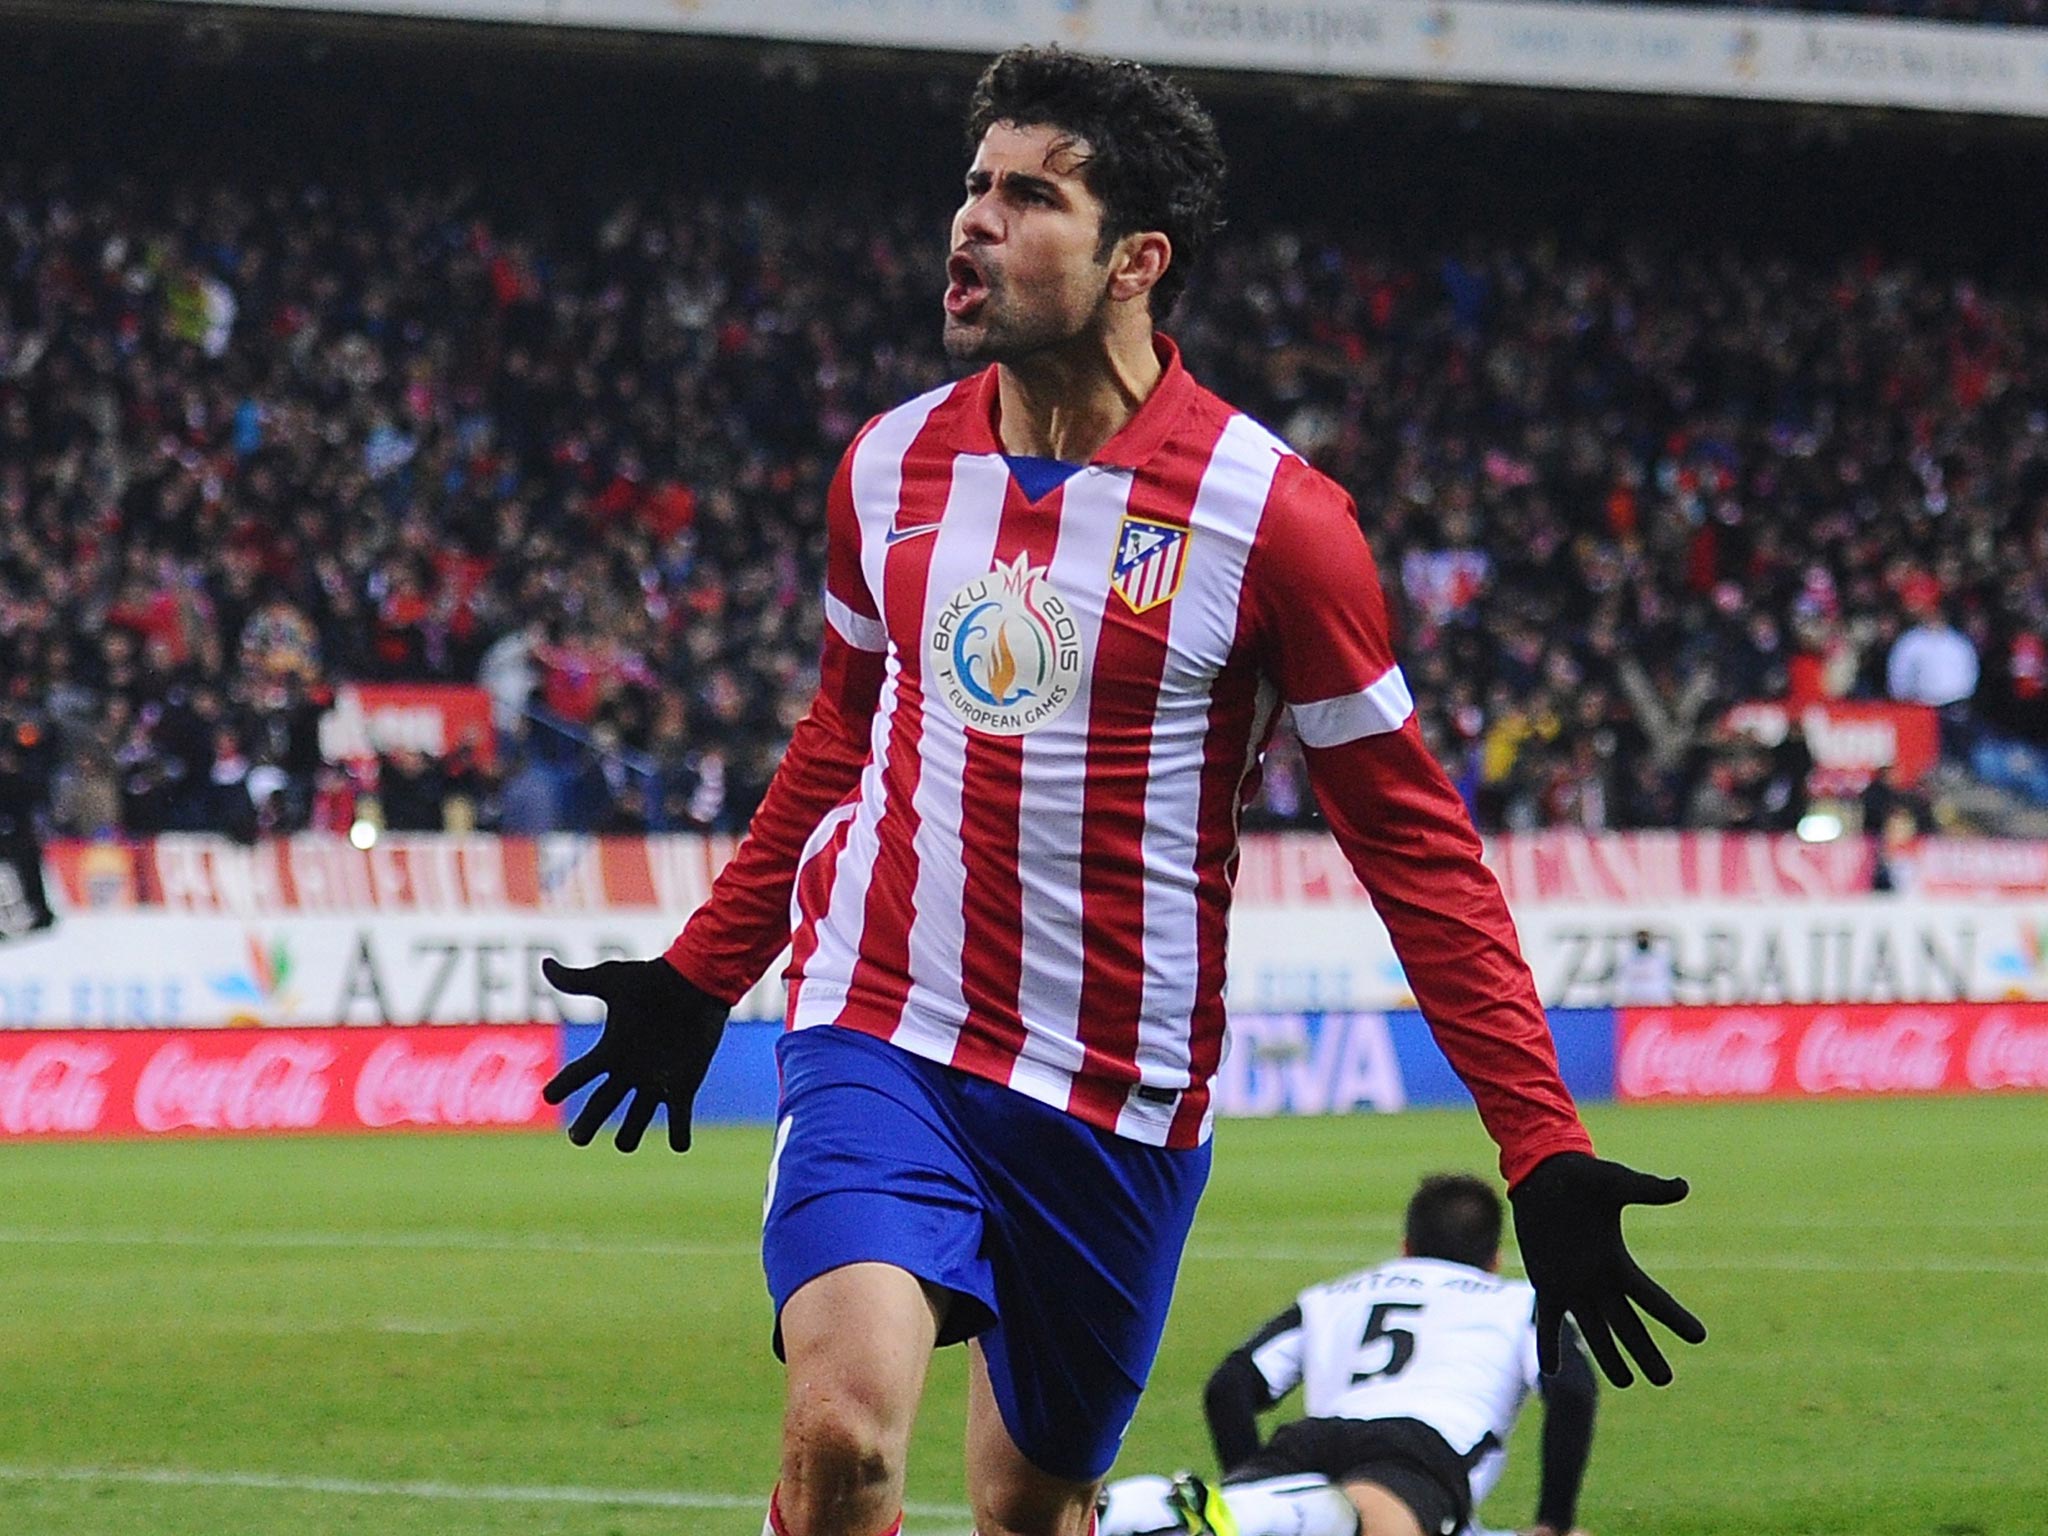 Chelsea have agreed a deal to sign Diego Costa